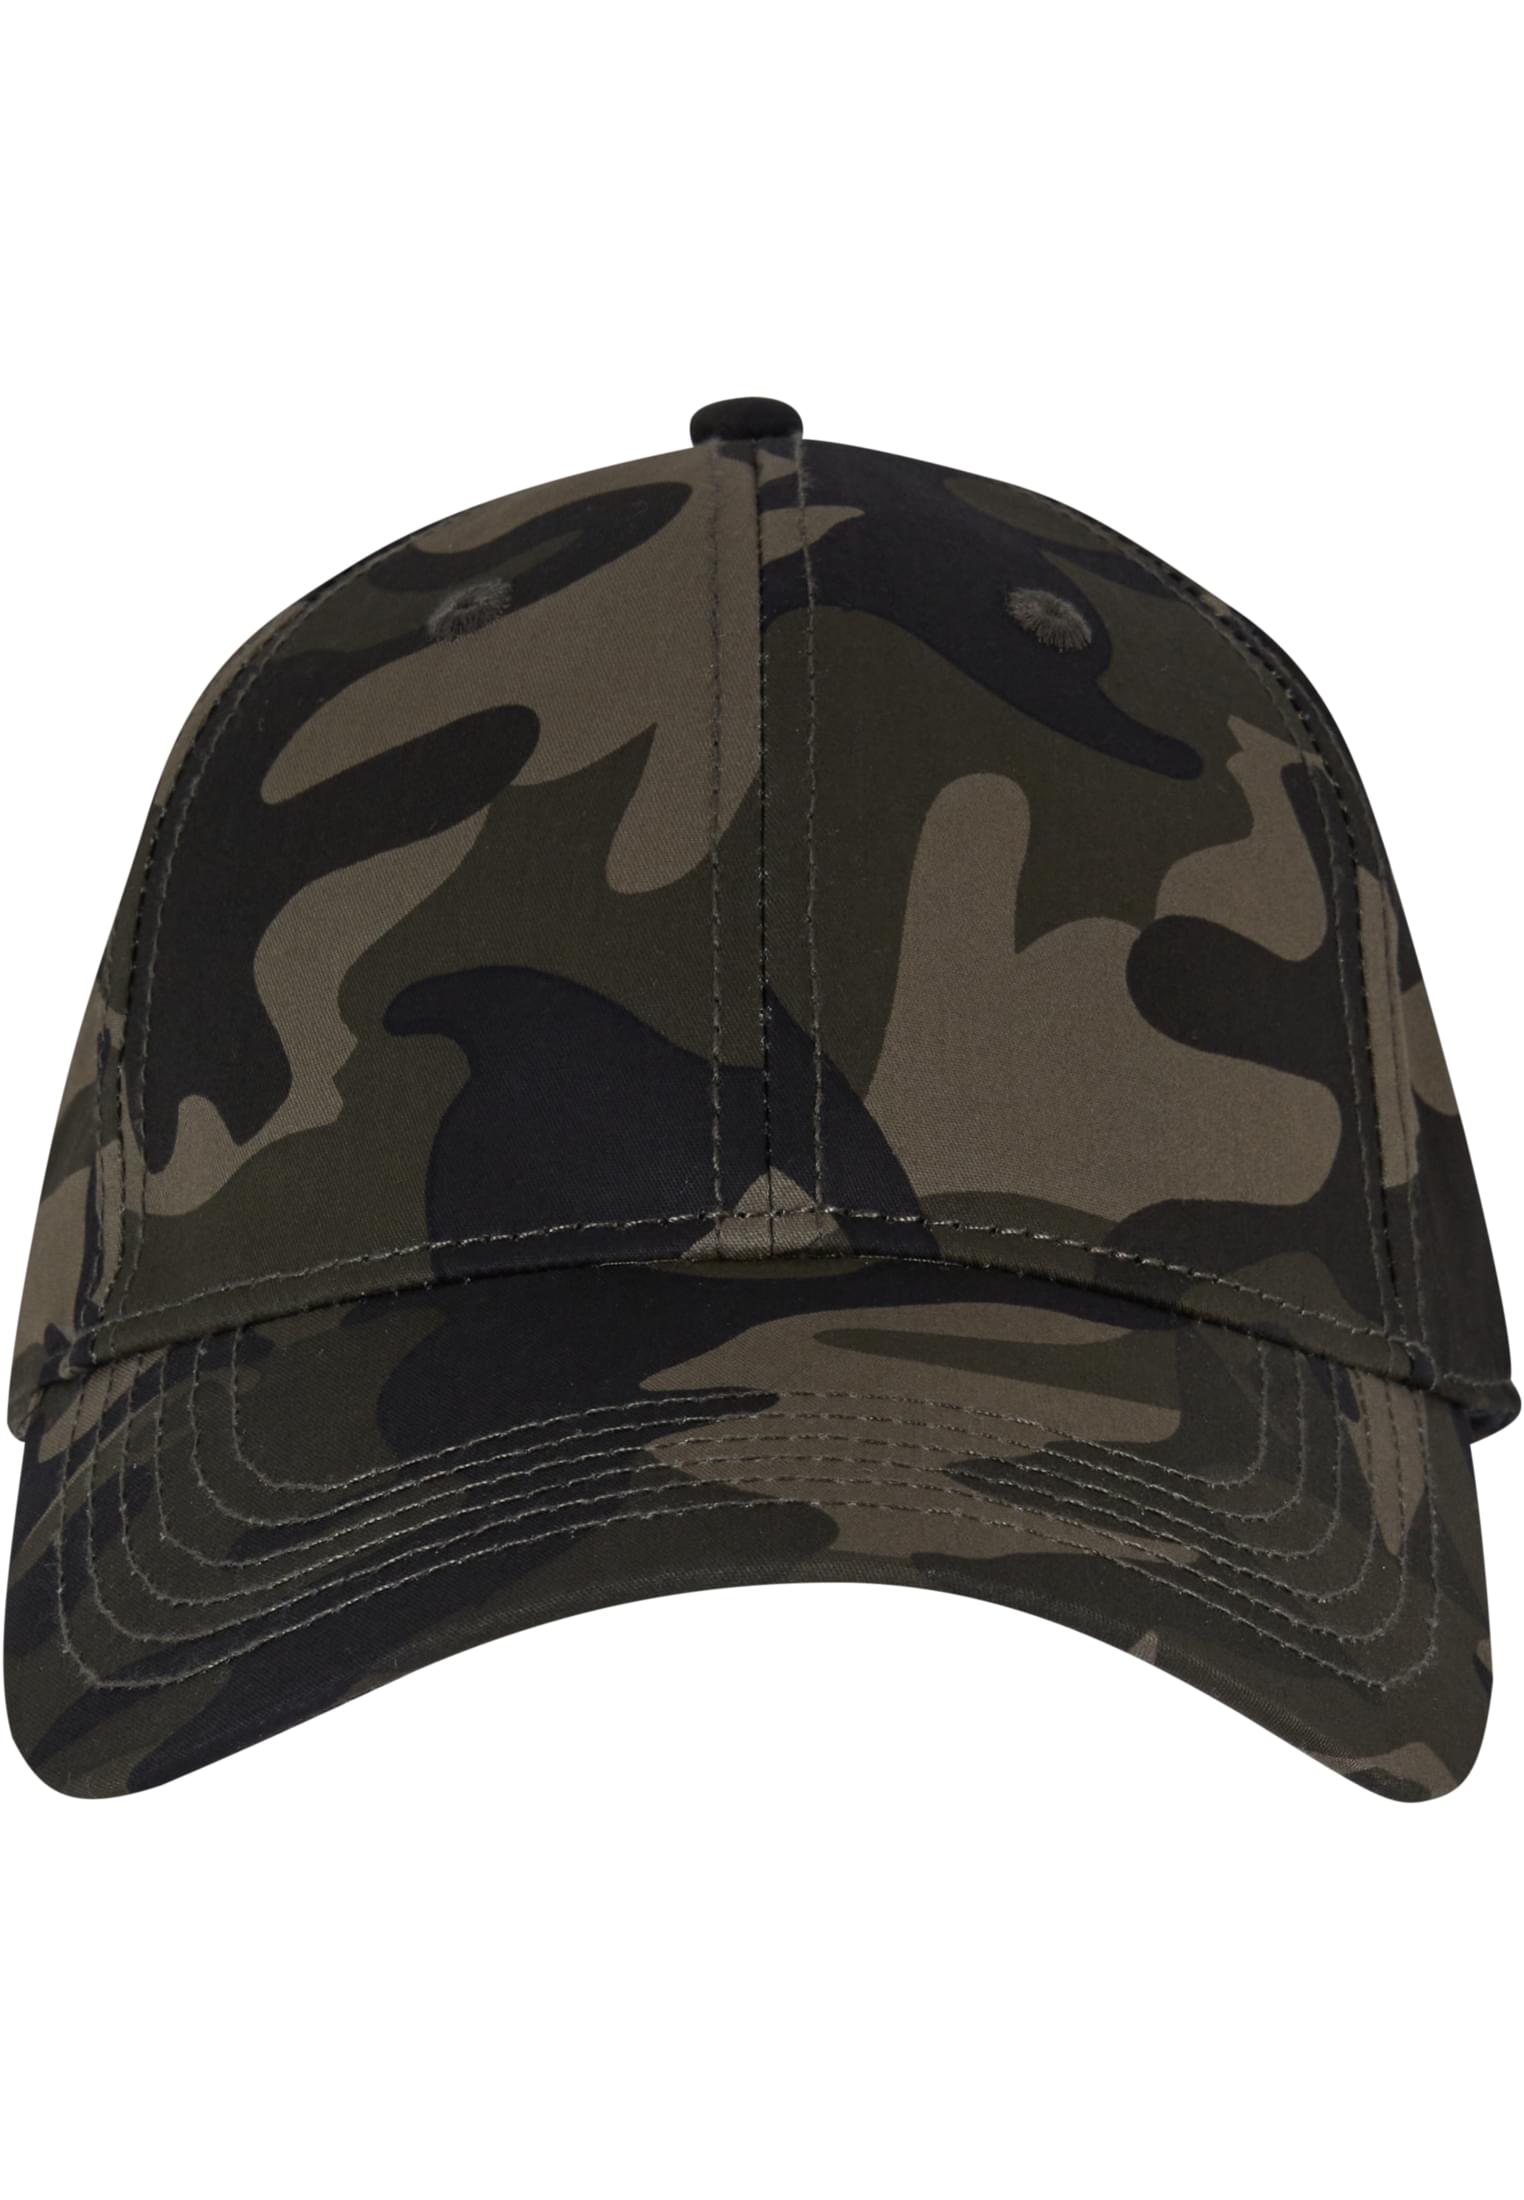 Cayler and Sons C&S Plain Curved Cap